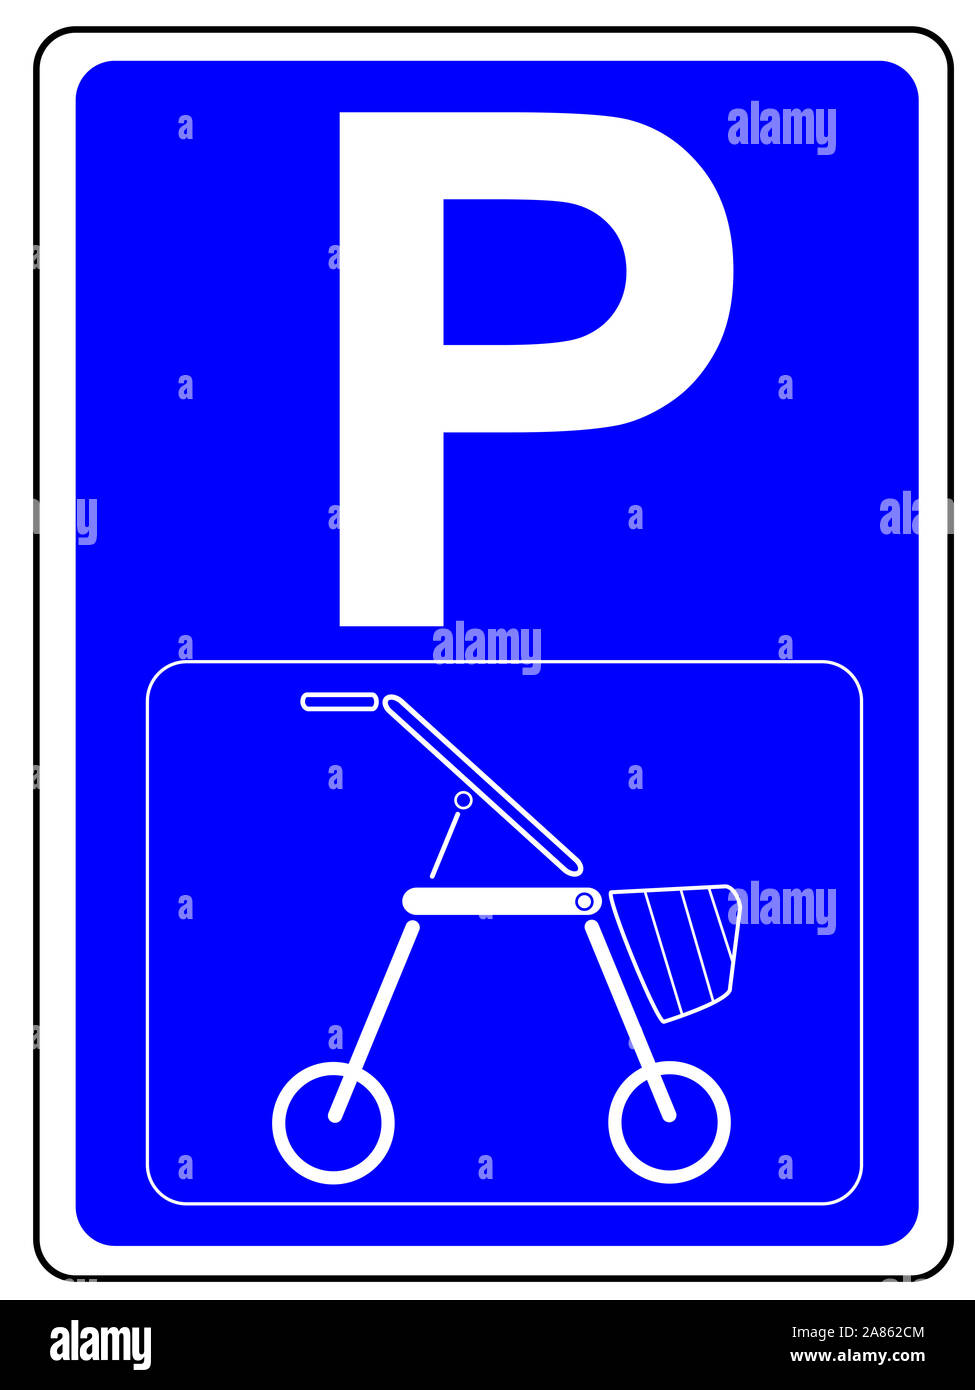 Parking space sign German Rollator Stock Photo